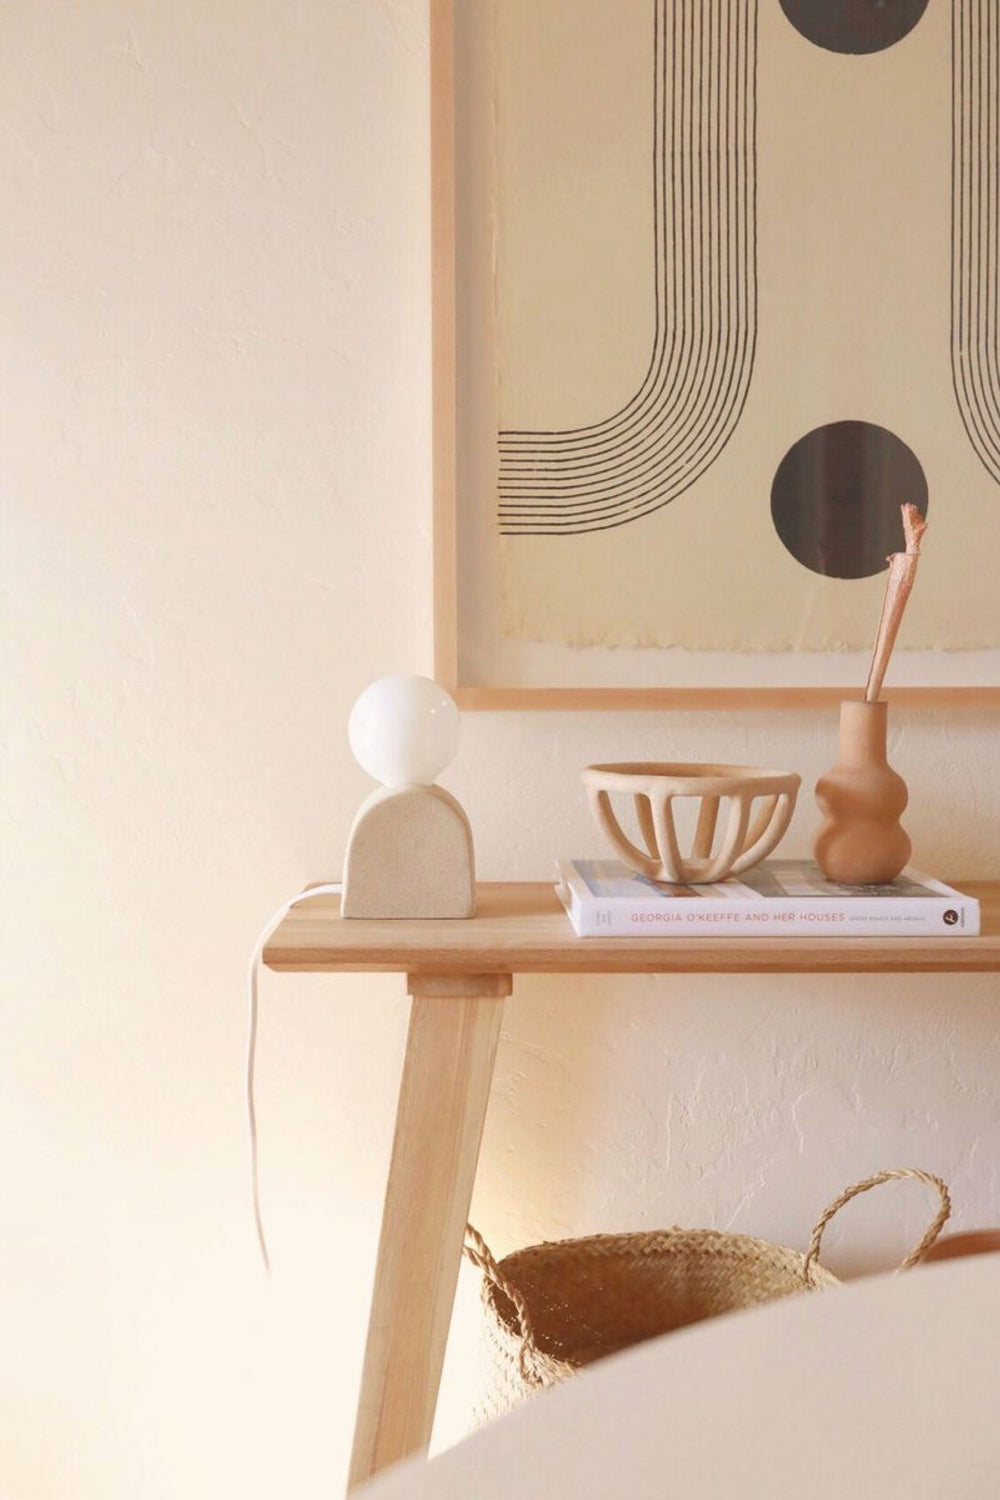 Speckled Mima Table Lamp